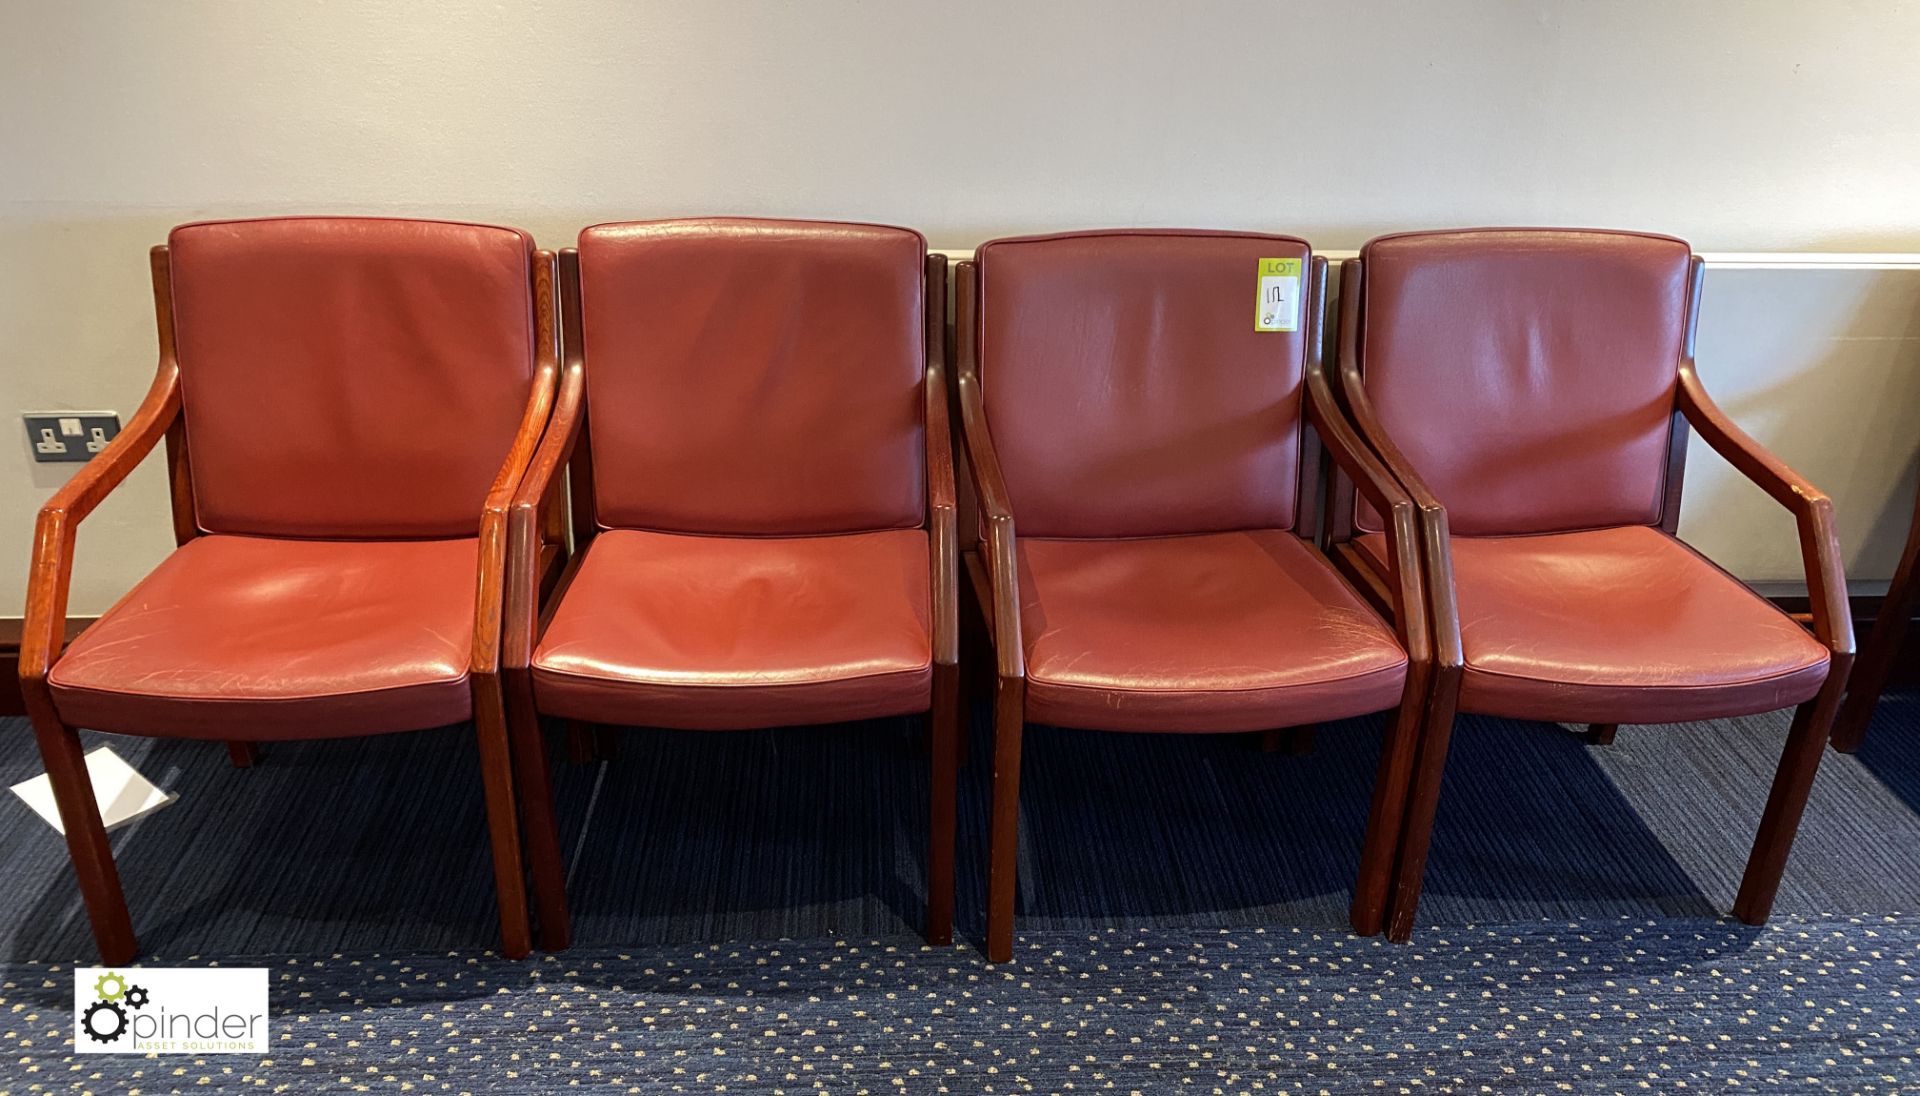 4 leather upholstered mahogany framed Meeting Chairs, plum (located in First Floor Boardroom/Meeting